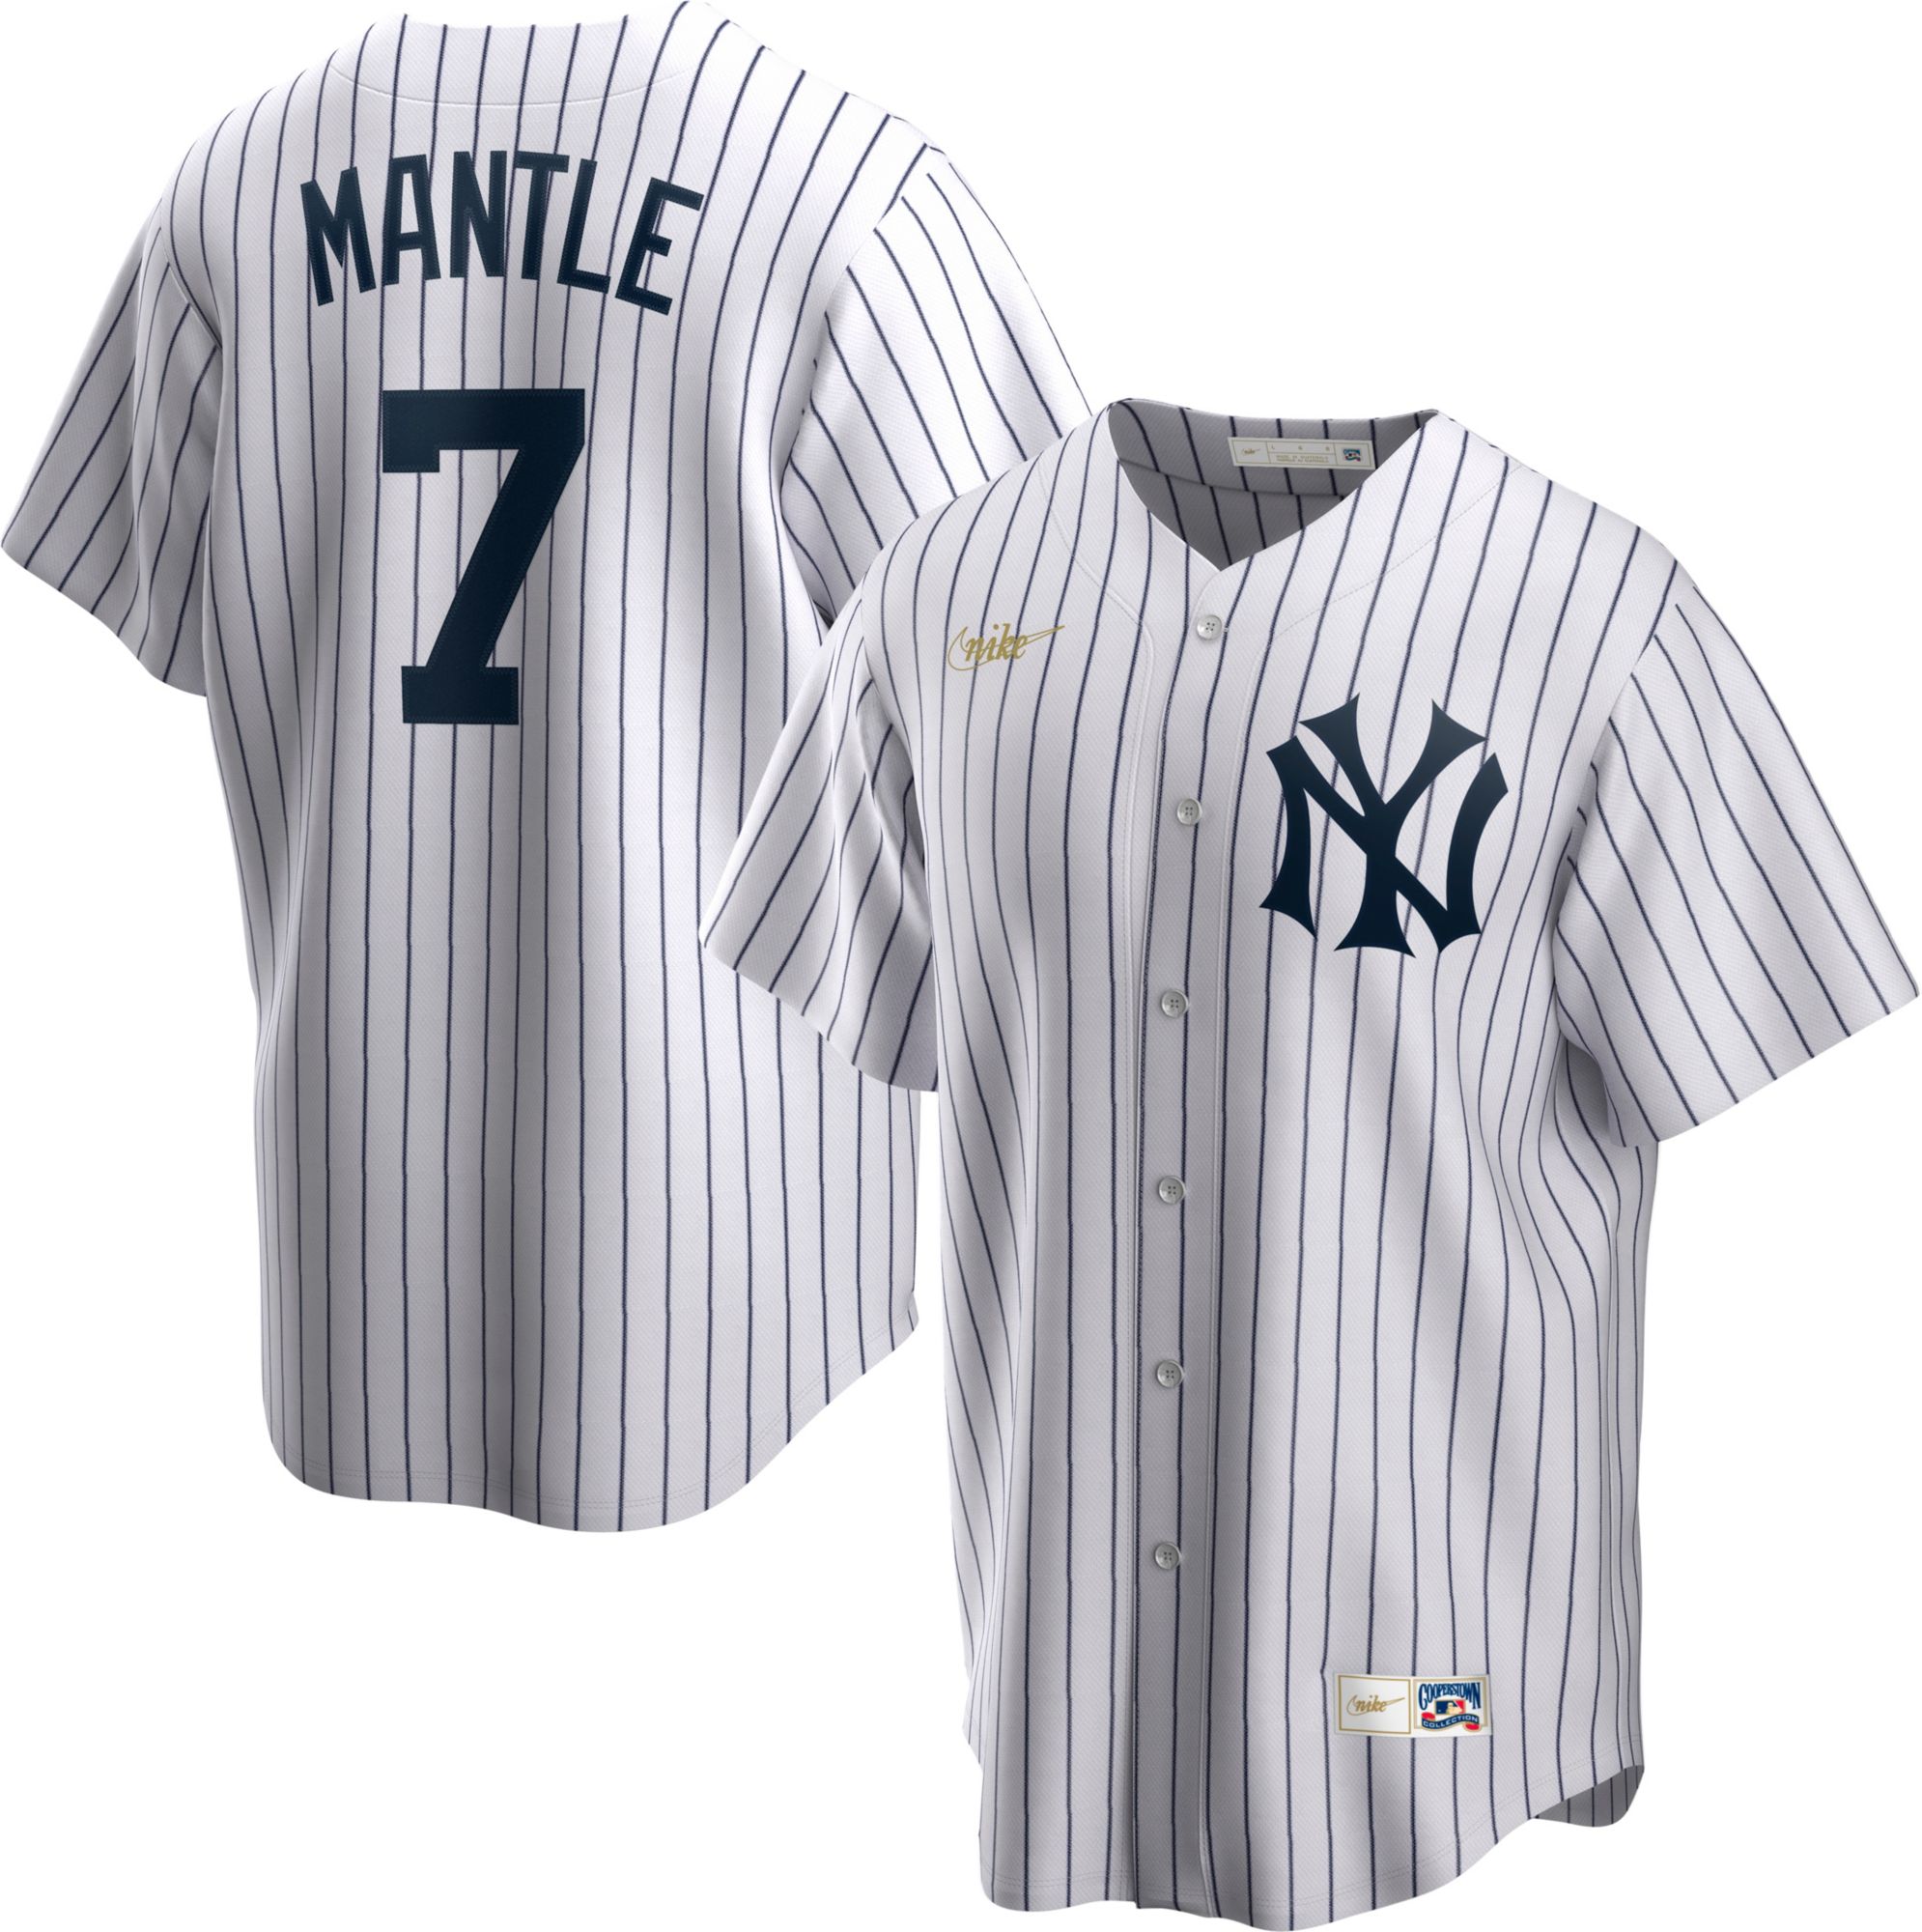 Fanatics Authentic Giancarlo Stanton New York Yankees Game-Used #27 White Pinstripe Jersey vs. Mets on July 26, 2023